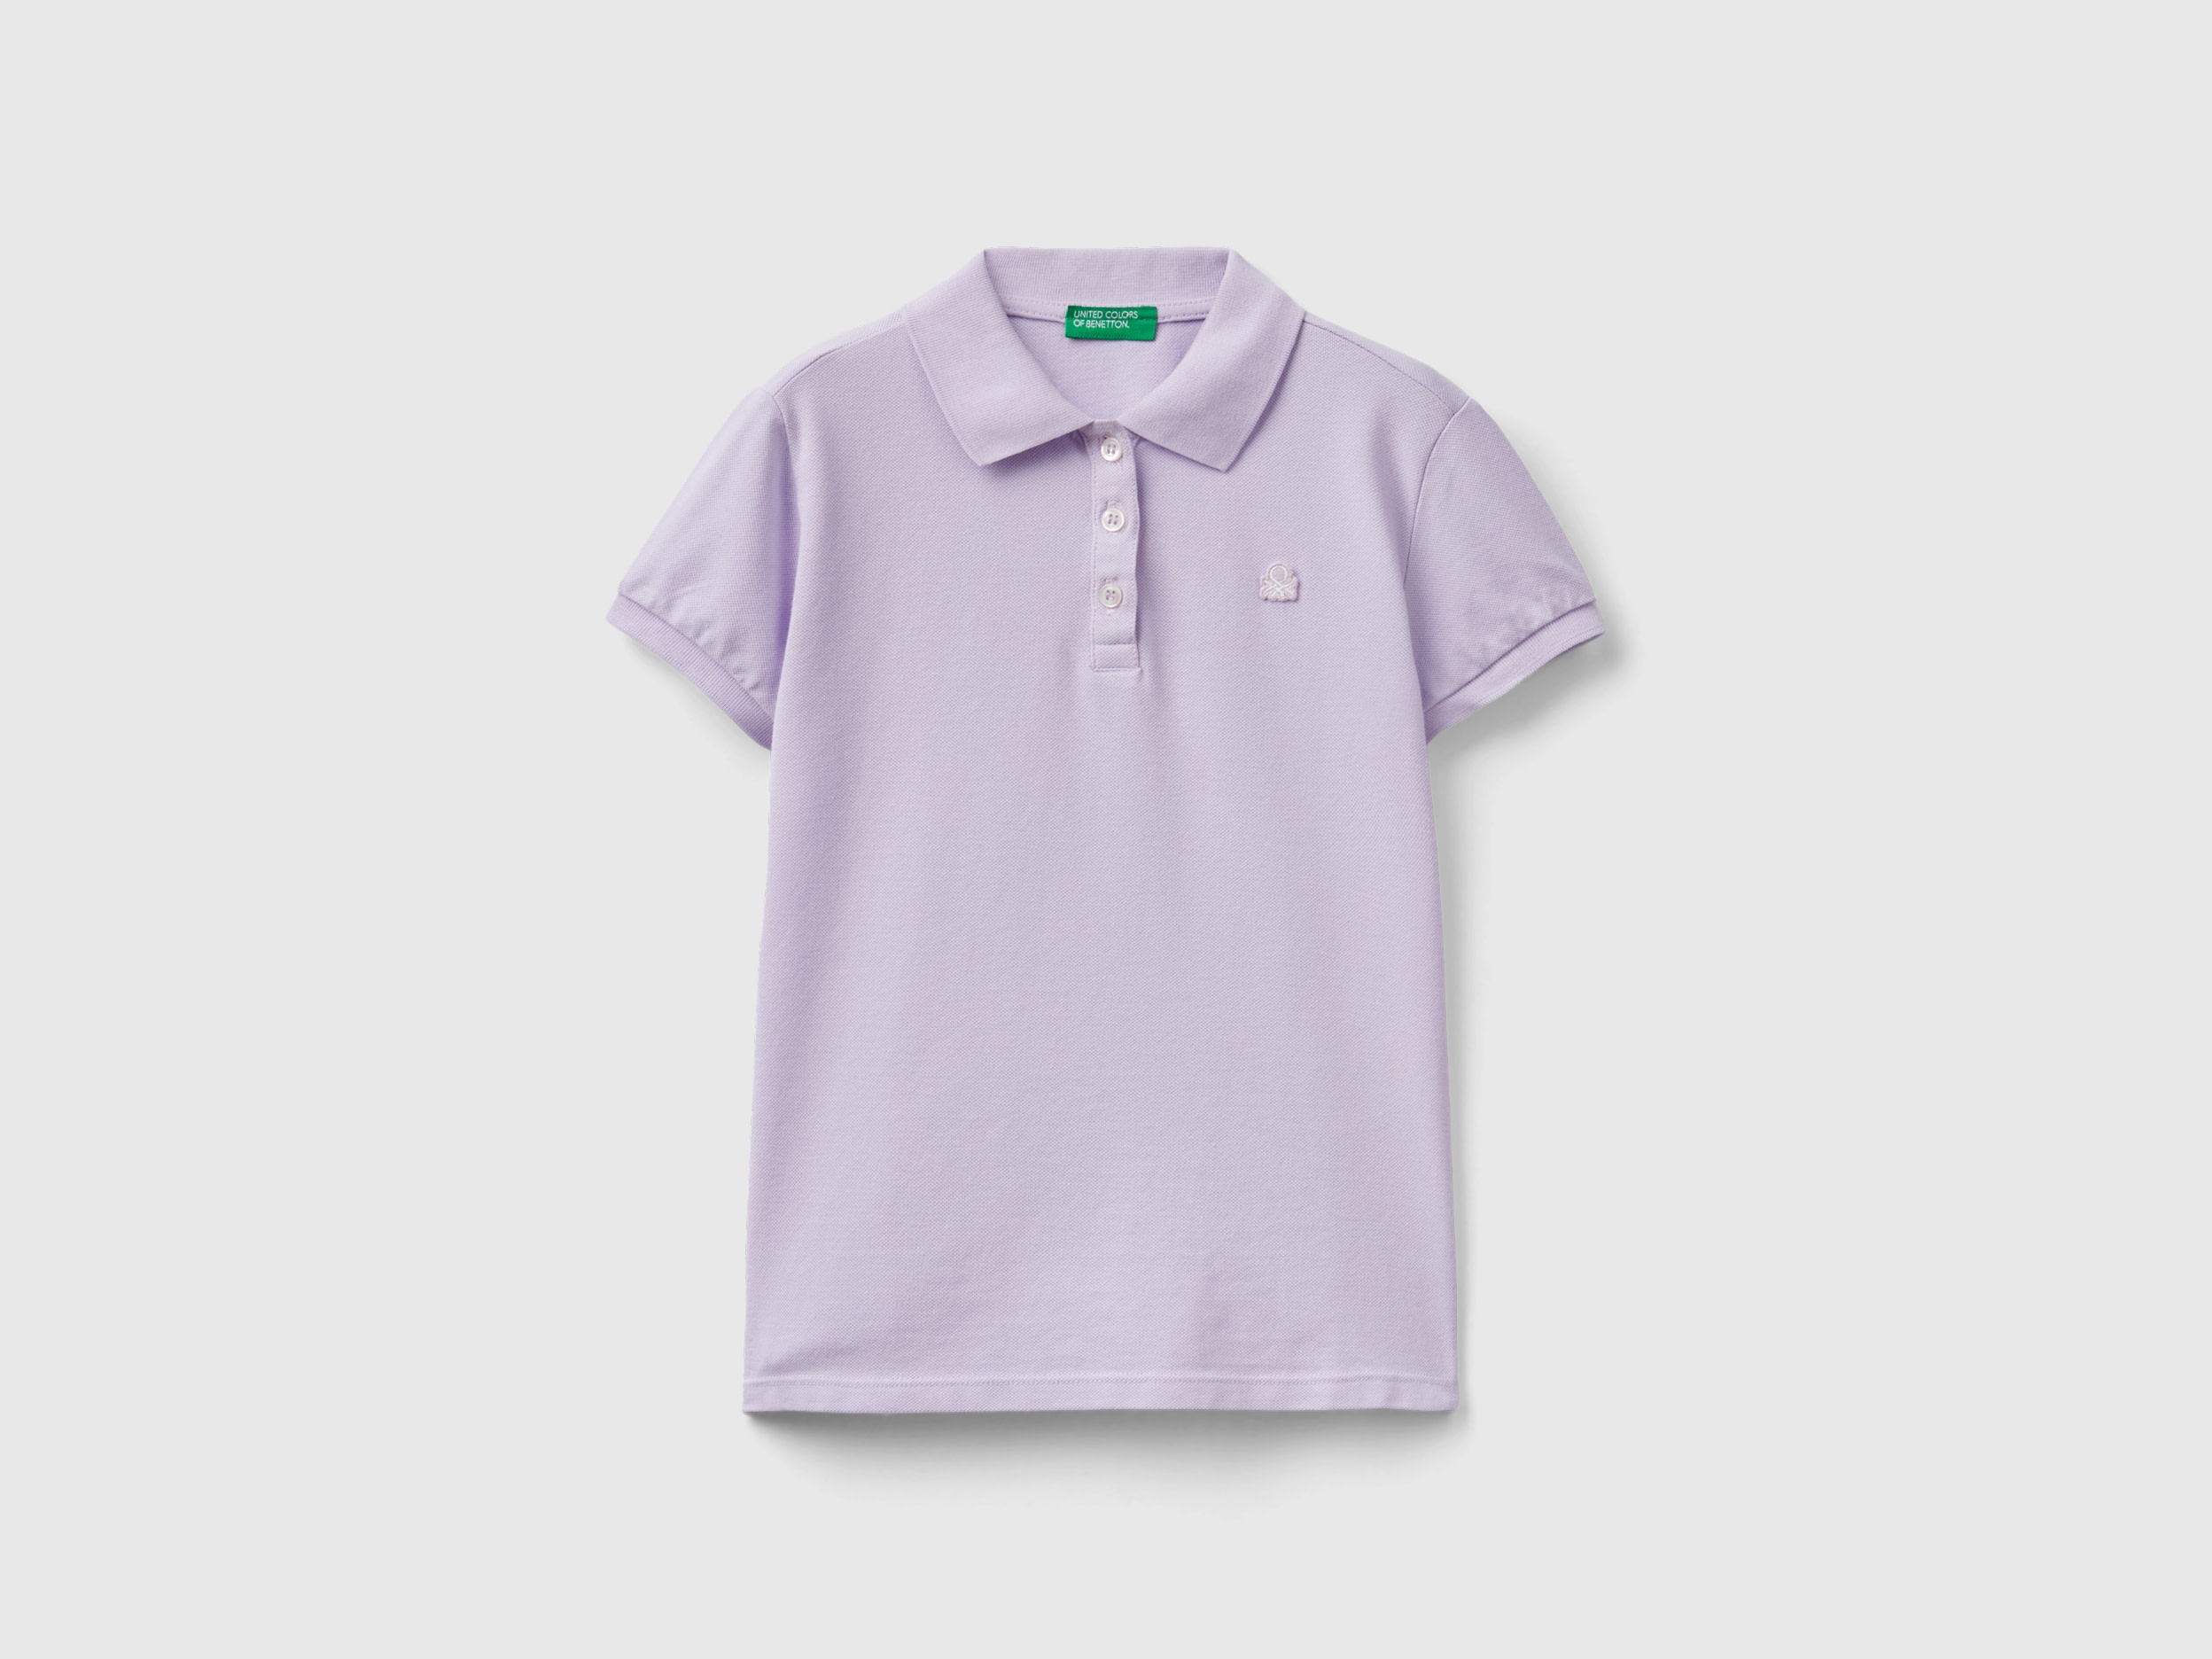 Image of Benetton, Short Sleeve Polo In Organic Cotton, size 2XL, Lilac, Kids